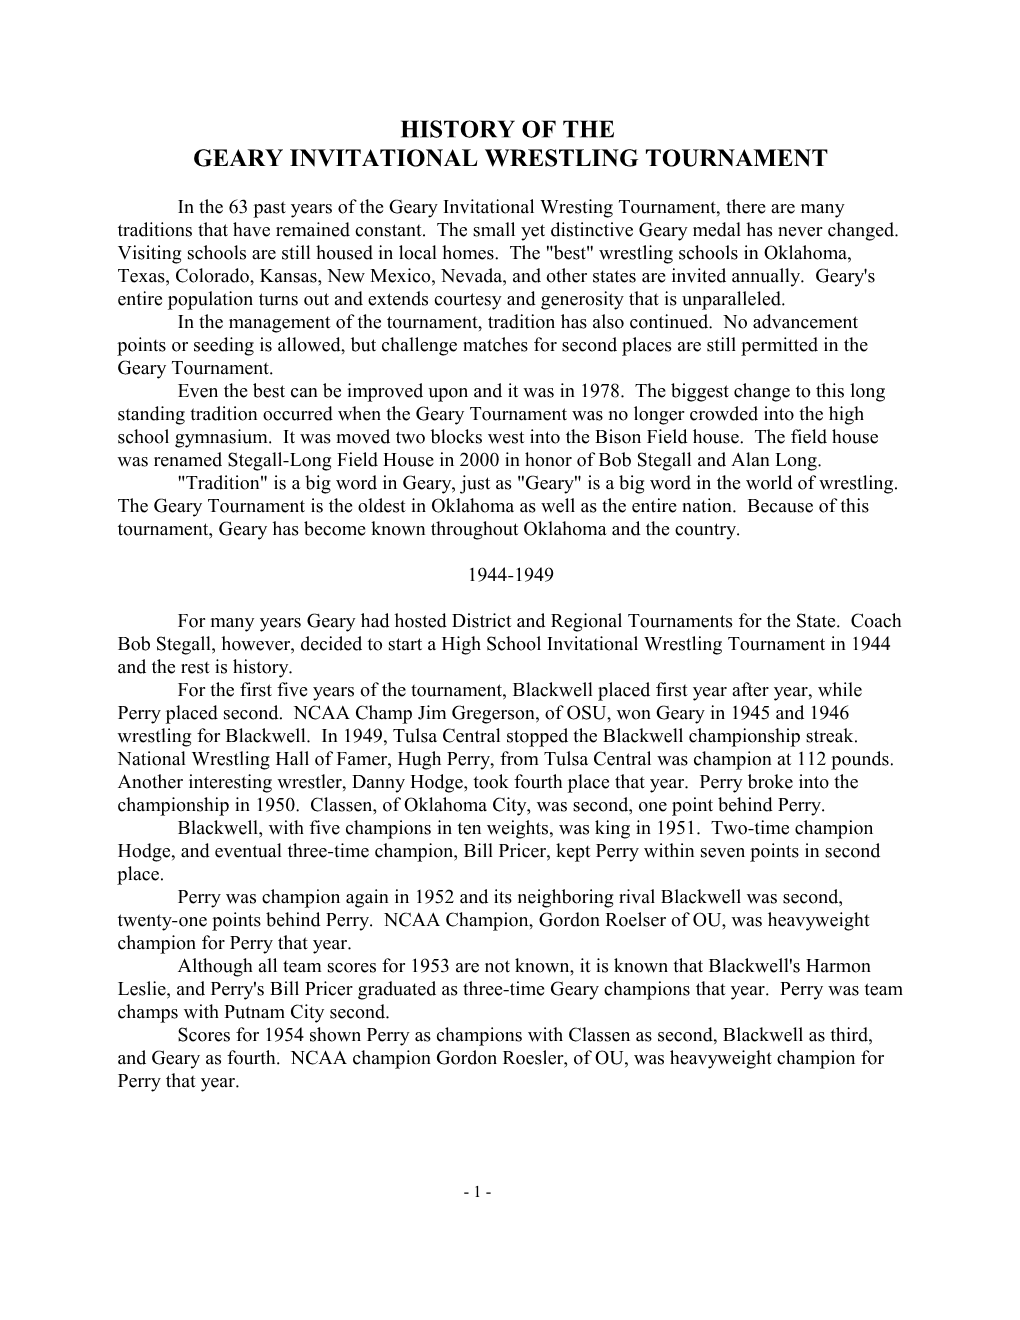 History of the Geary Wrestling Tournament